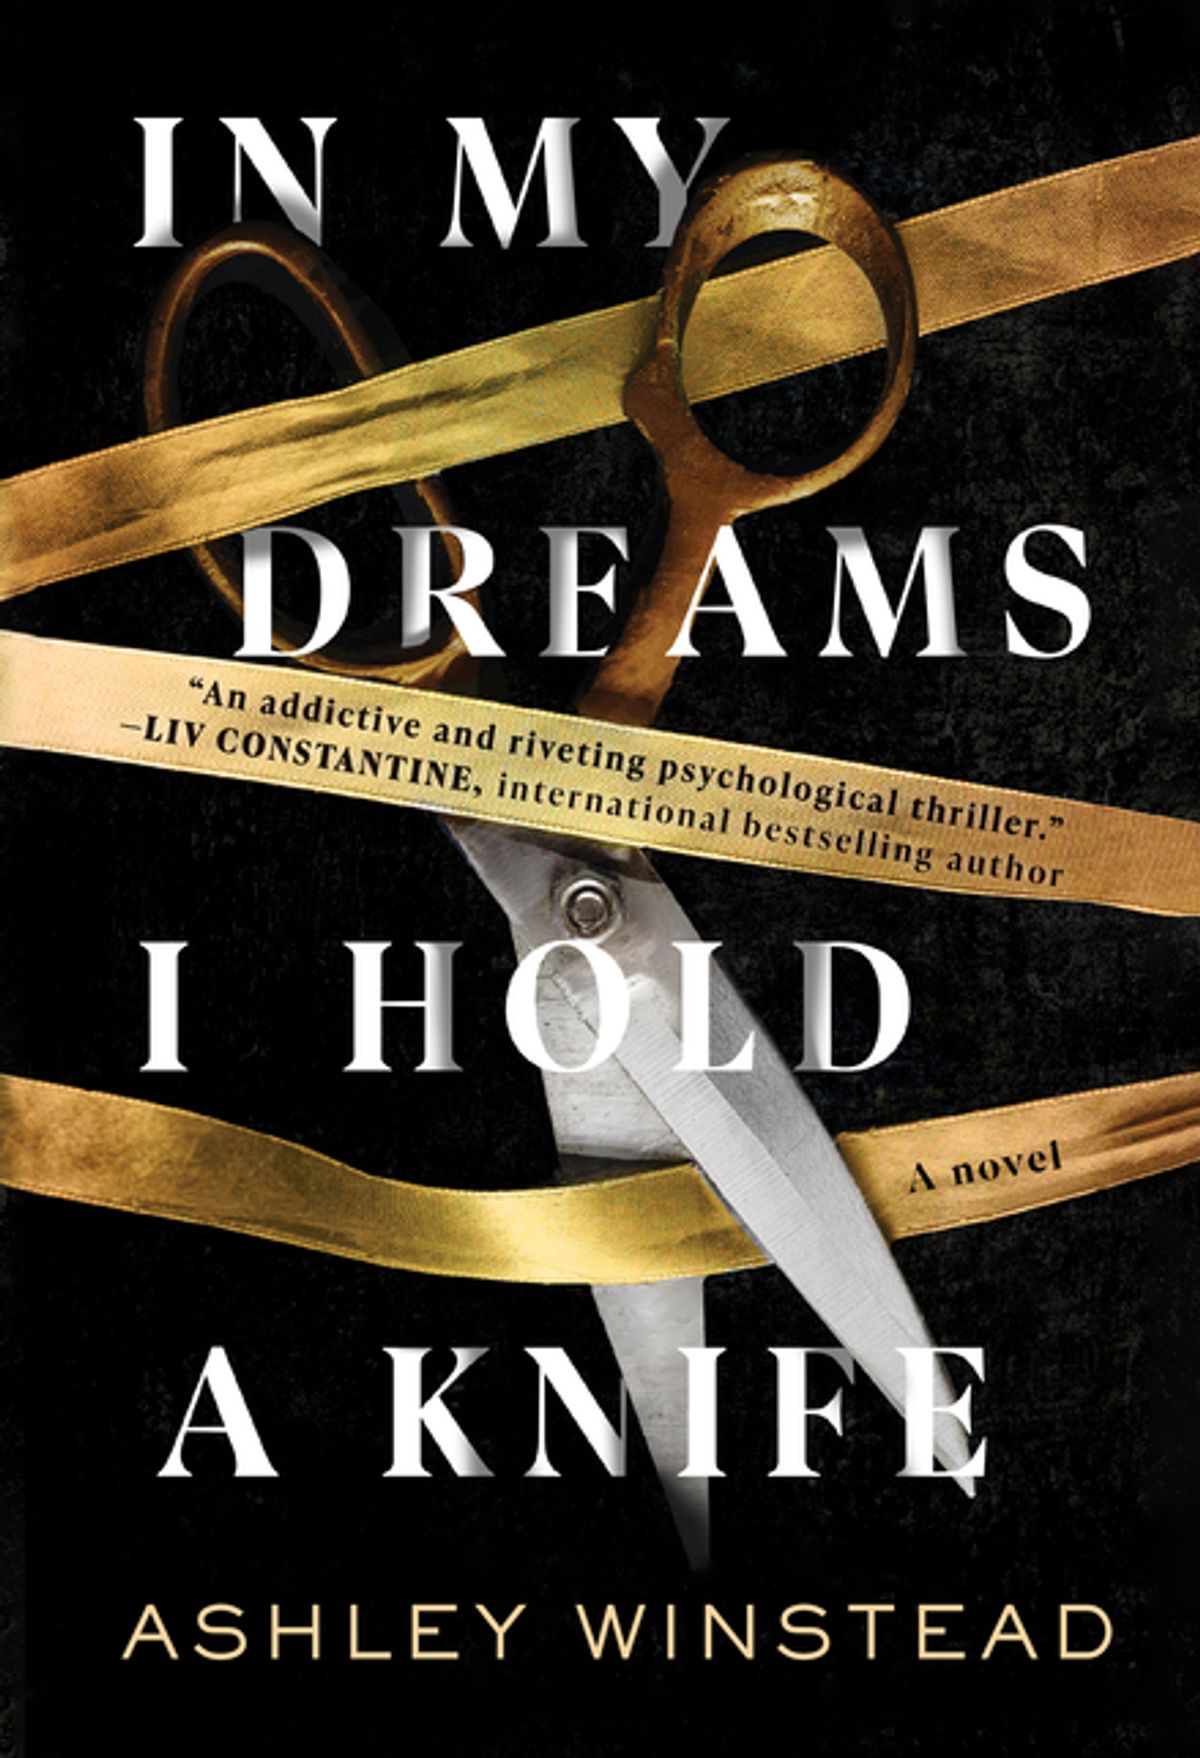 Image for "In My Dreams I Hold a Knife"